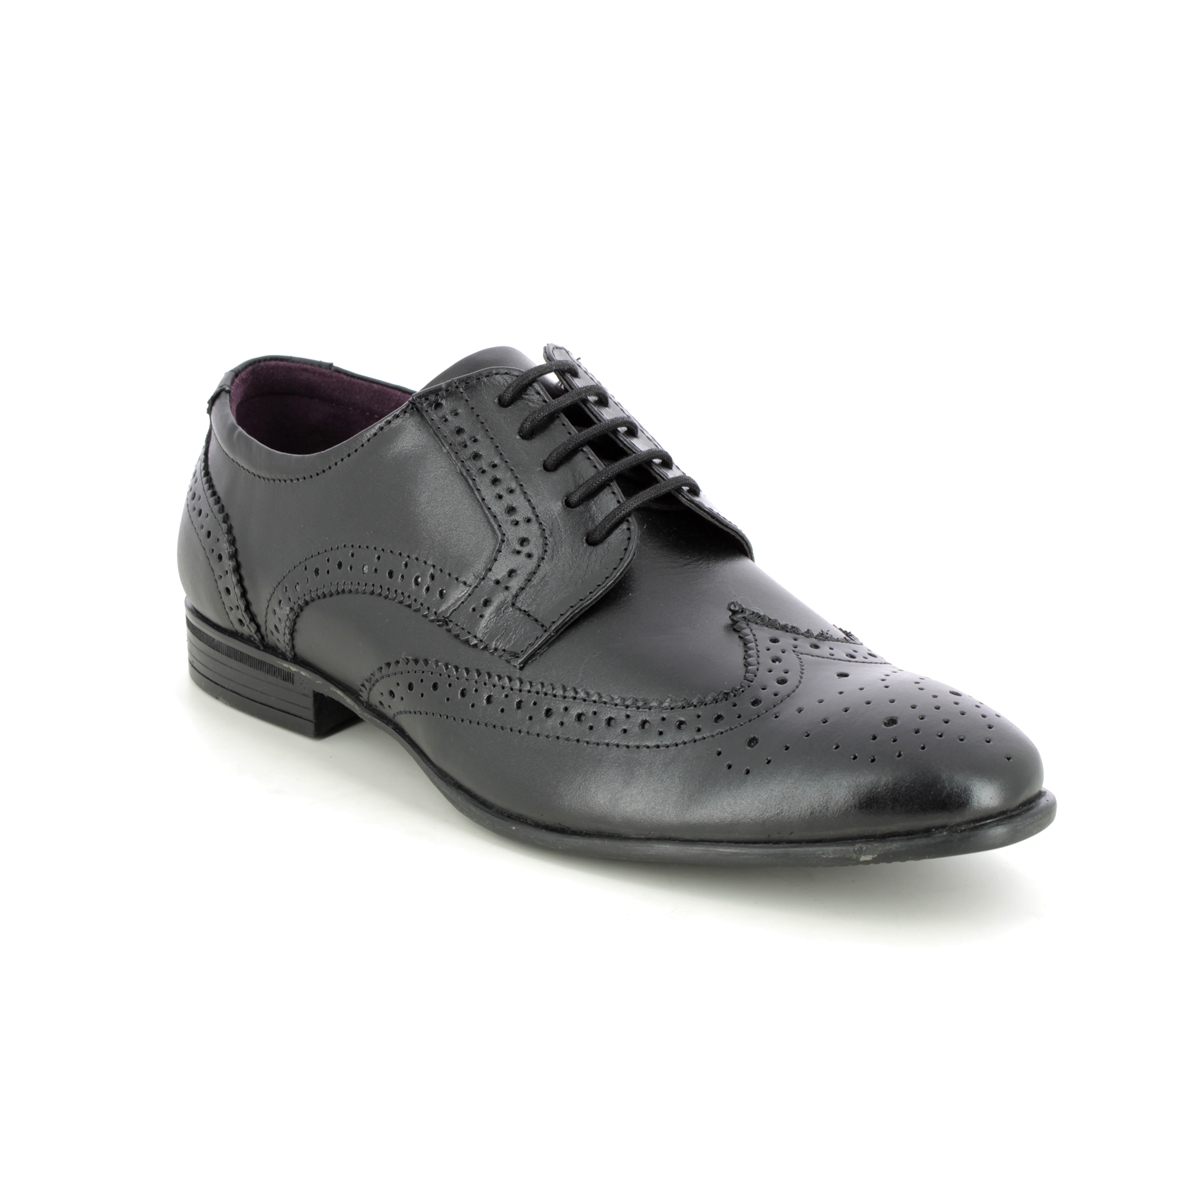 Lotus Easton Black leather Mens Brogues in a Plain Leather in Size 11